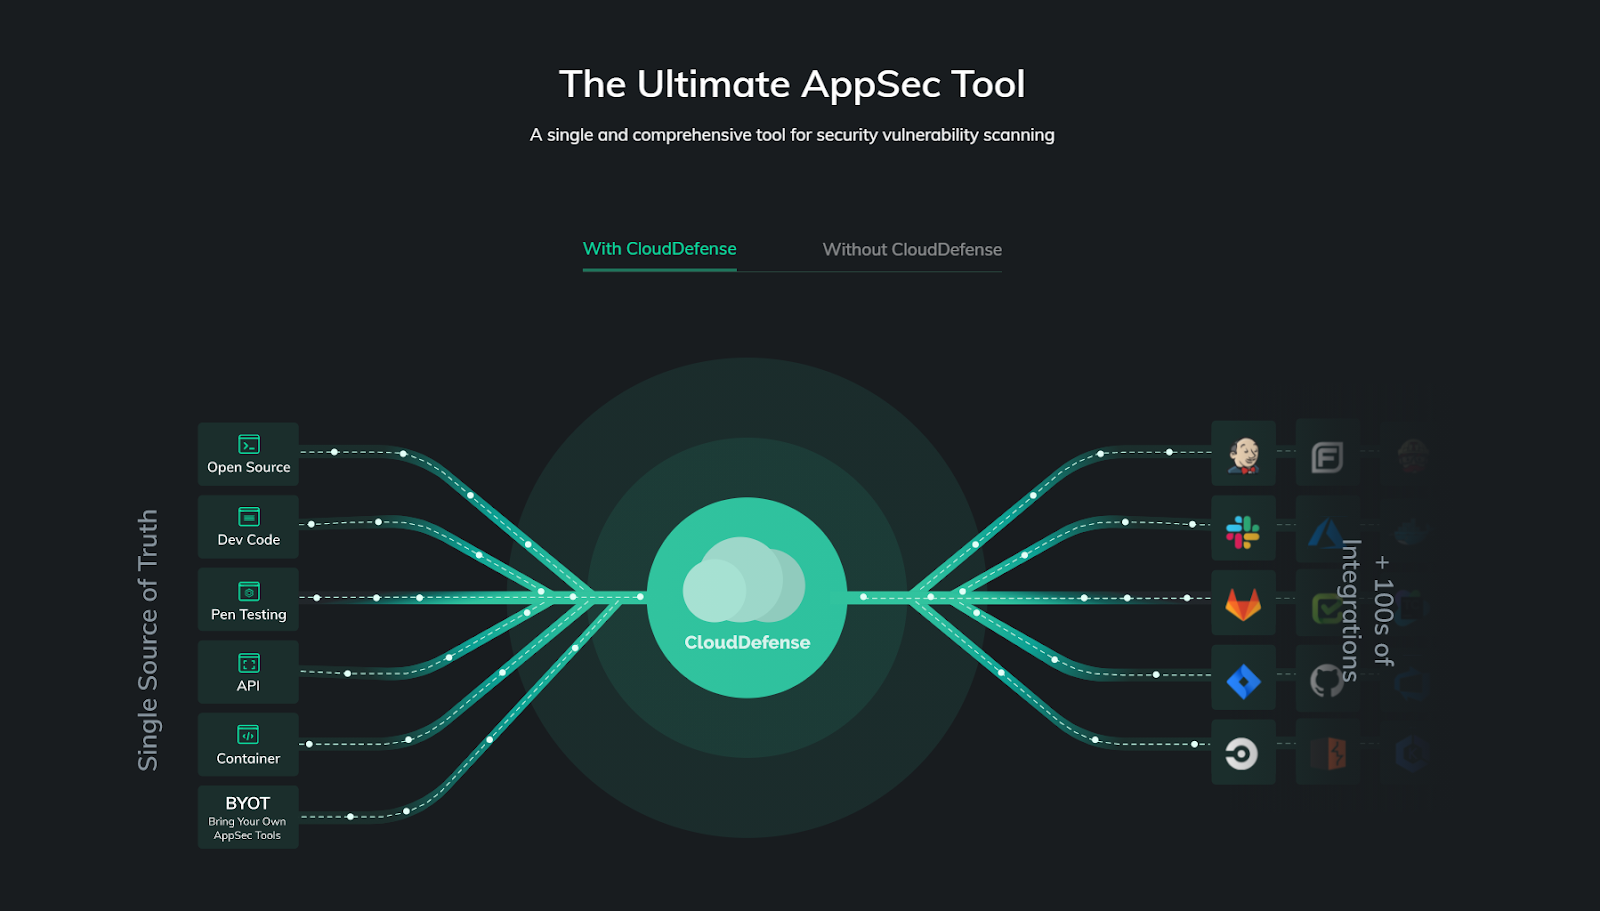 clouddefense.AI ultimate appsec tool | How to Avoid OSS License Compliance Lawsuits and Vulnerabilities